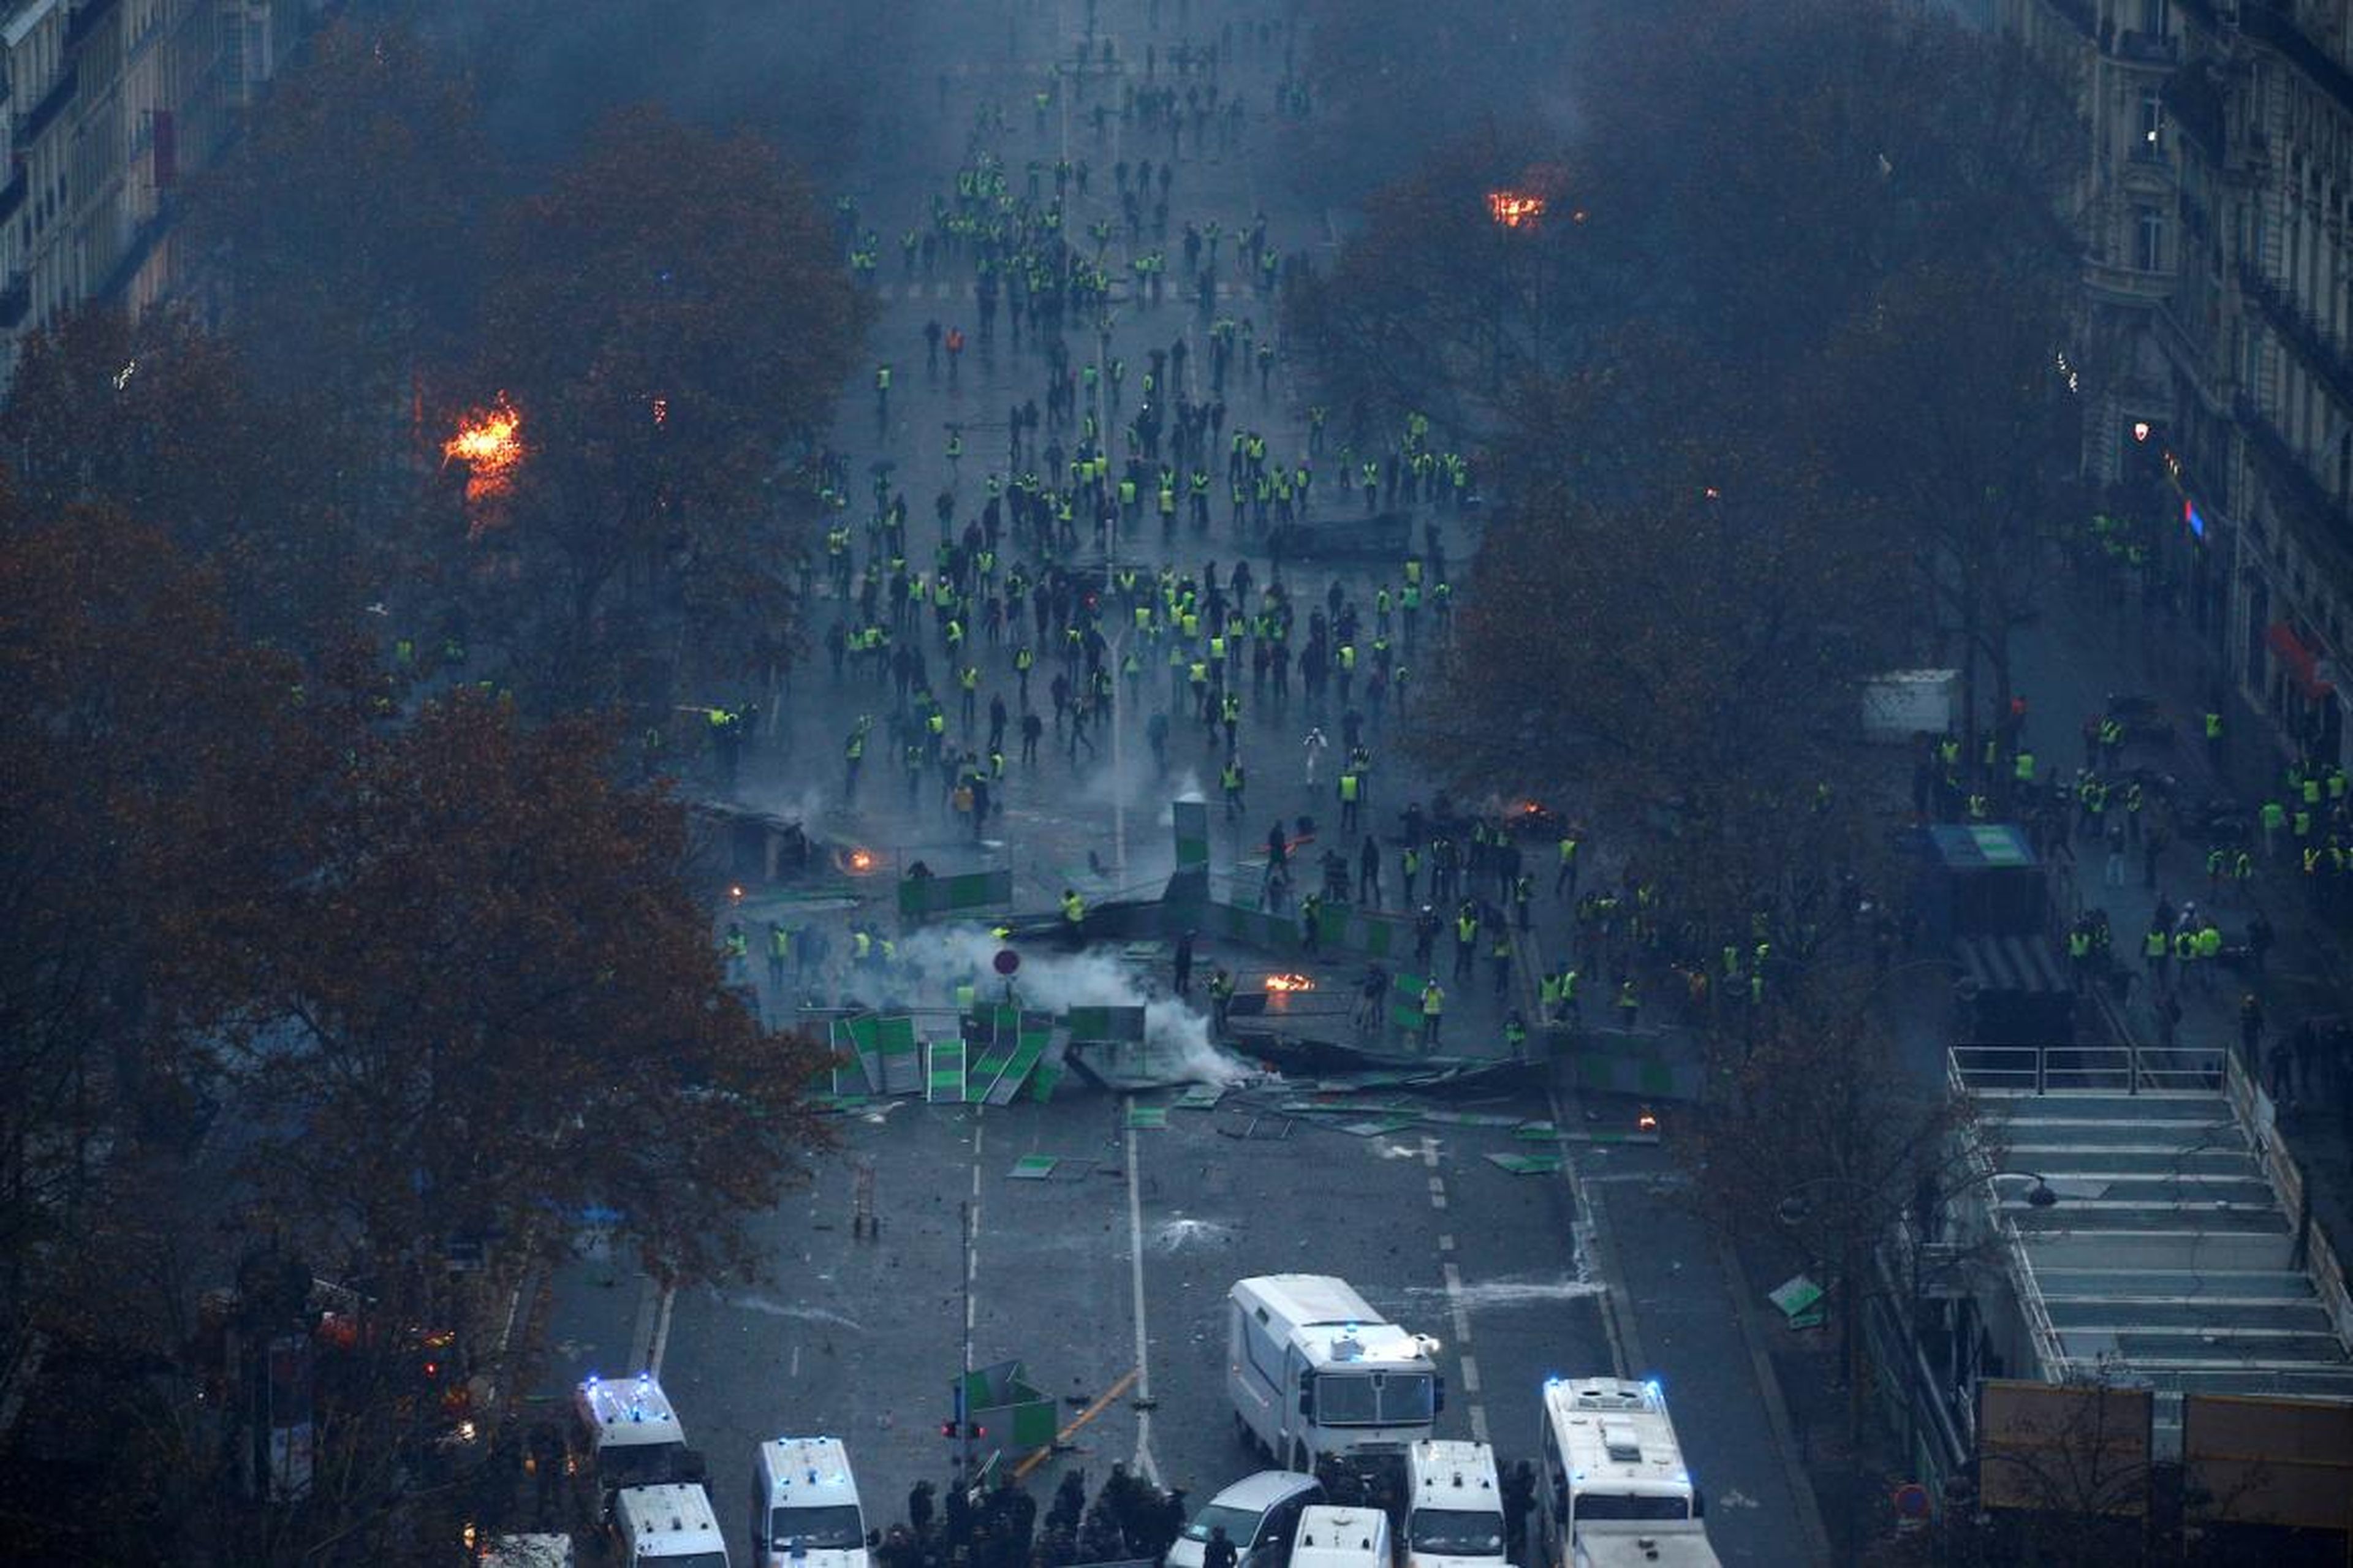 Protesters and the police faced off on Paris' streets.